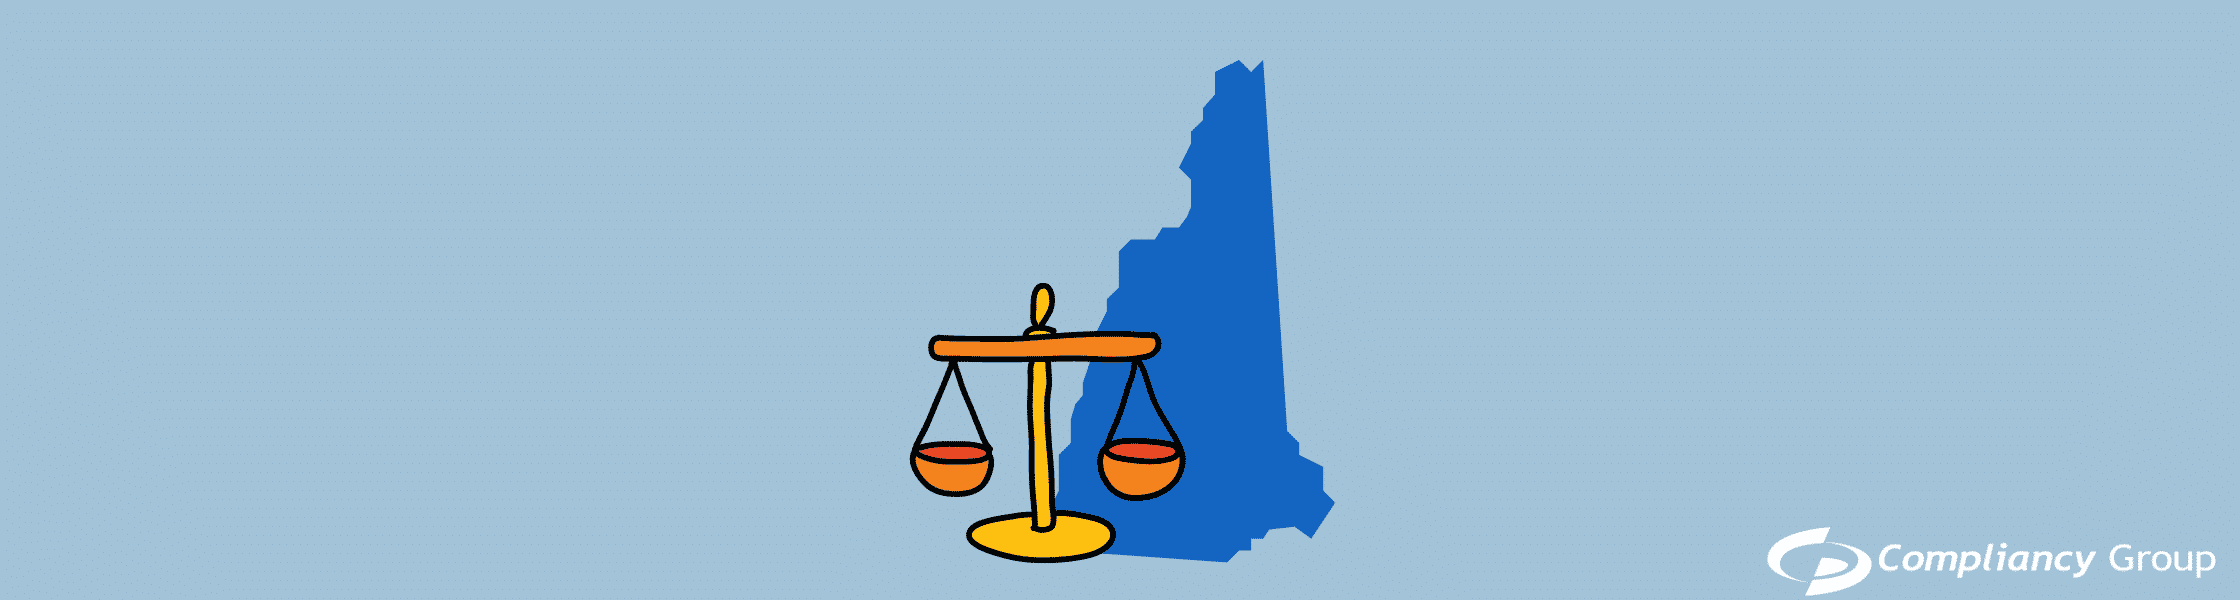 New Hampshire Insurance Data Security Law